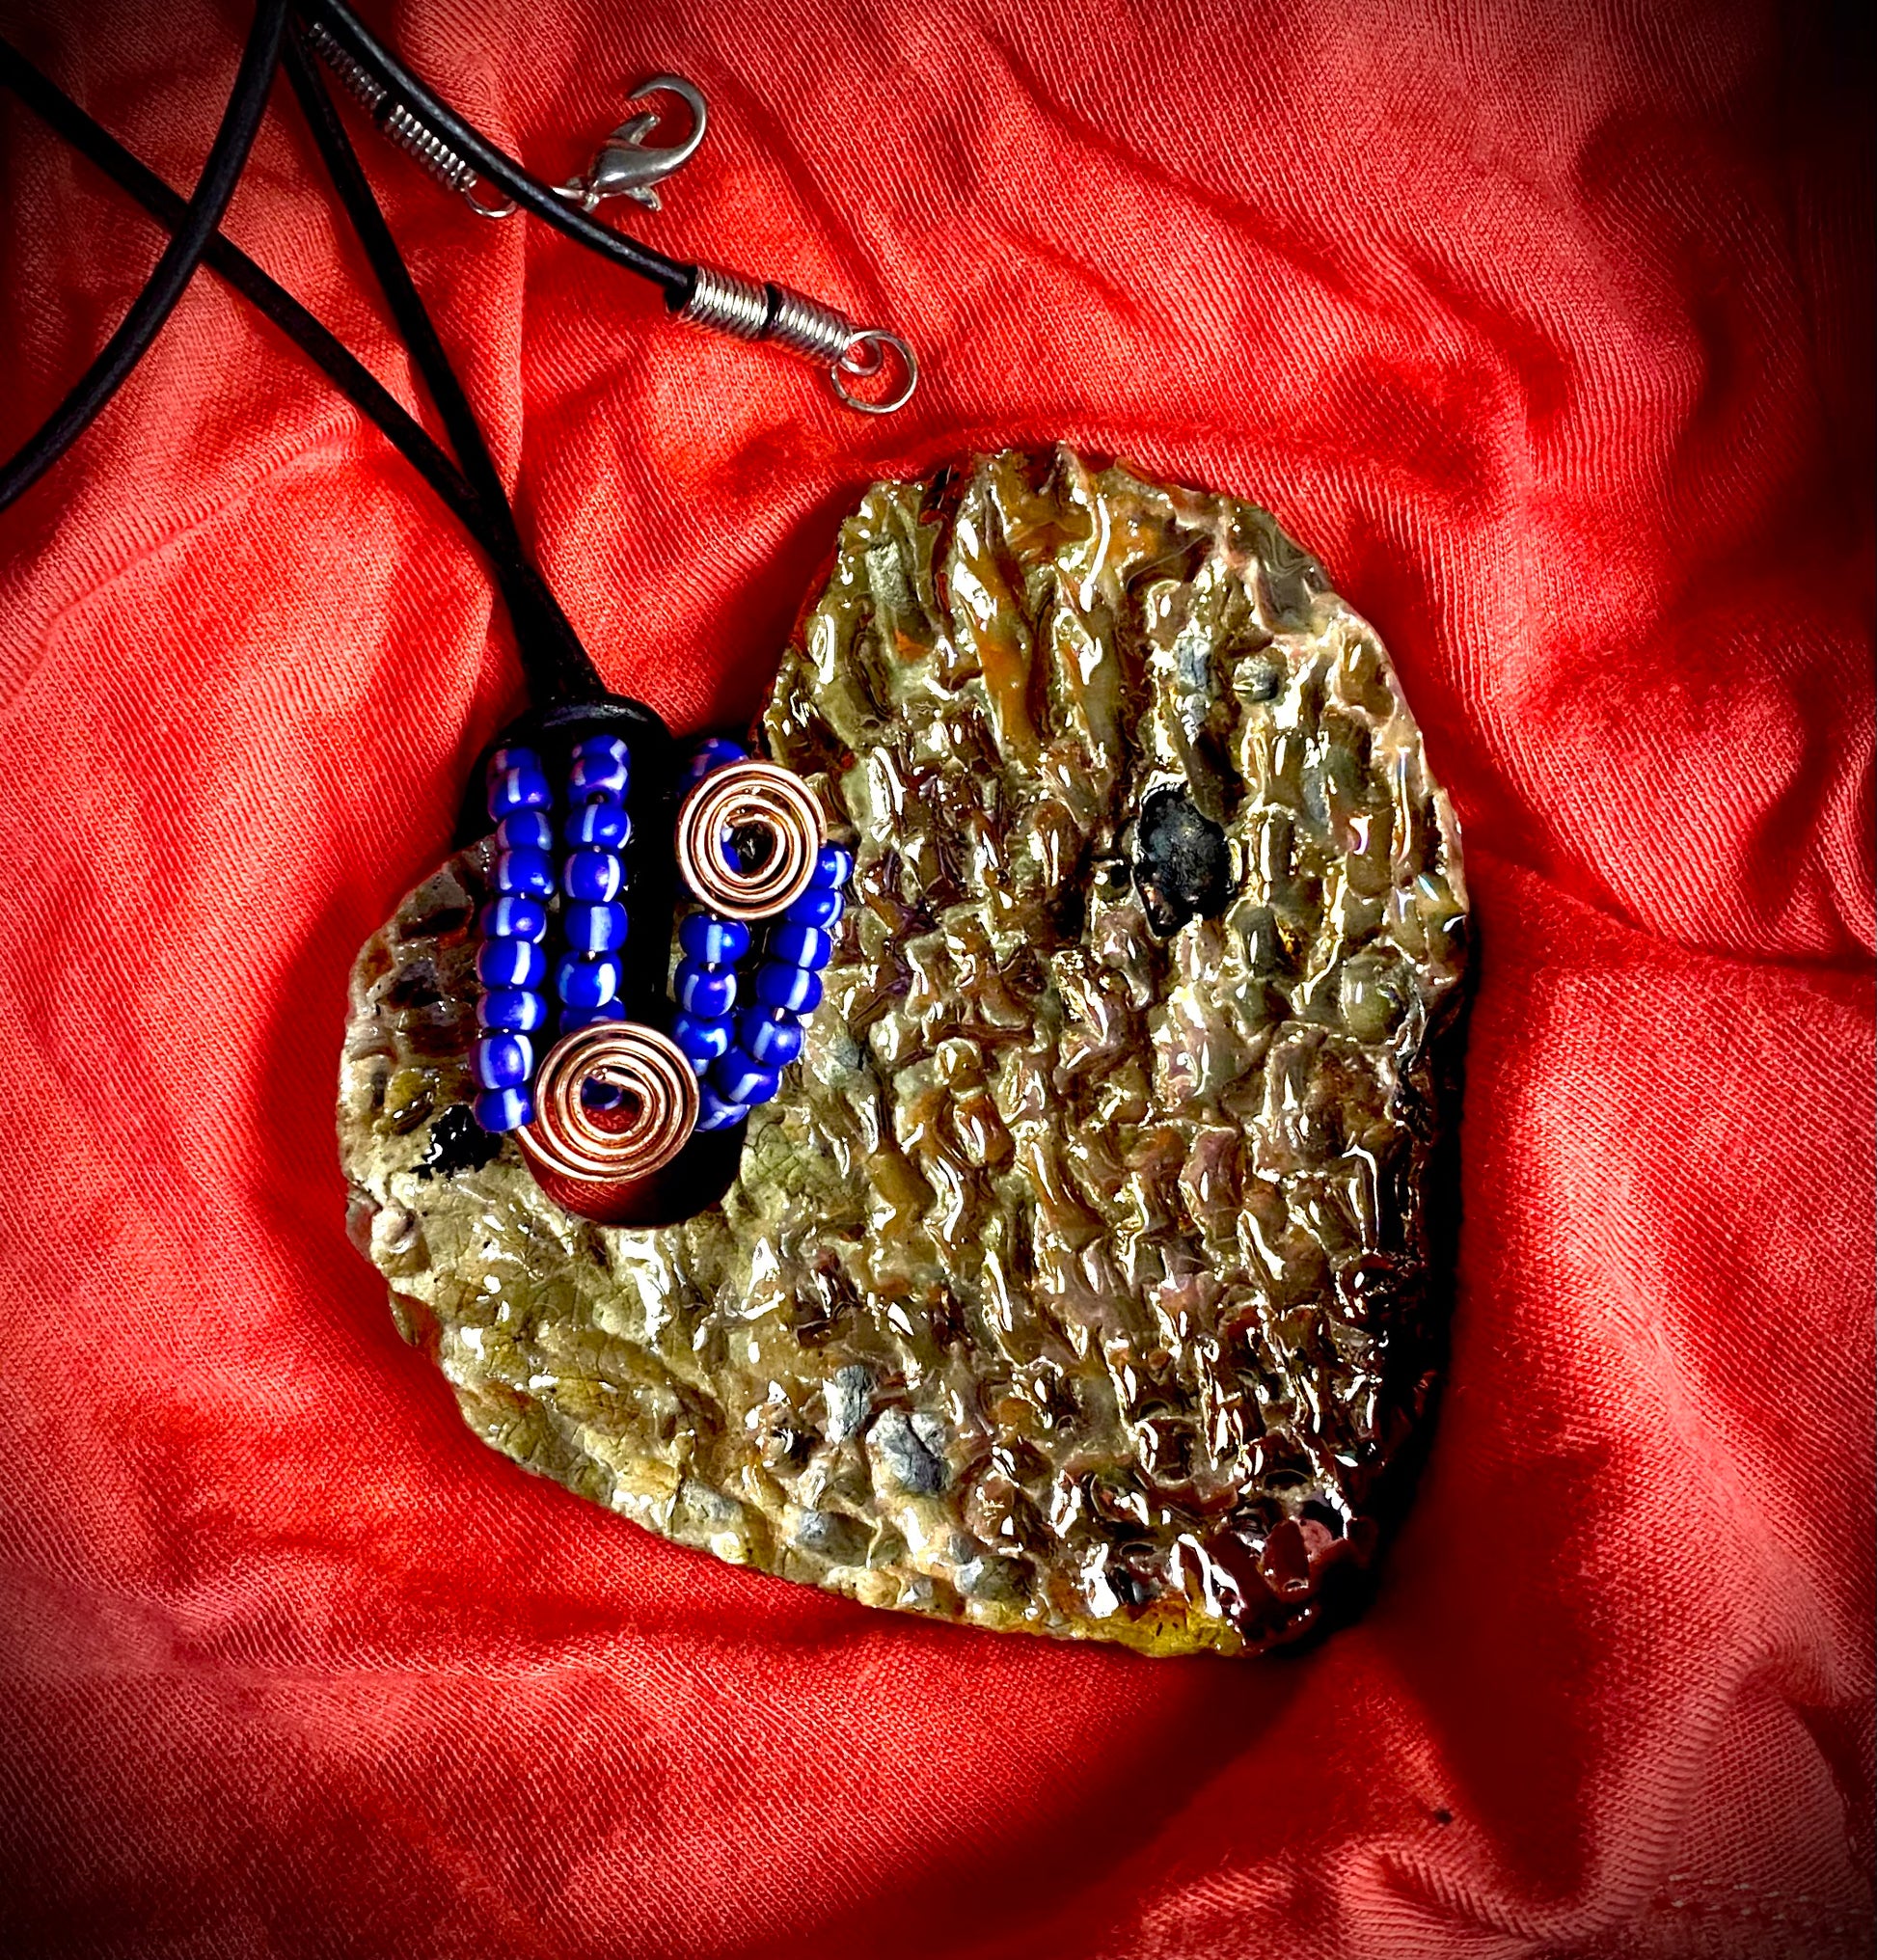 Have A Heart ! Each heart pendant is handmade with love! It is 3"x 3" and weighs approx. 3ozs. This pendant has a golden white metallic raku glazes that renders a unique translucent  patina. The heart  has a high textured  surface. It holds a spiral of blue mini beads on a spiral copper wire. This pendant has a nice 12" black suede cord!